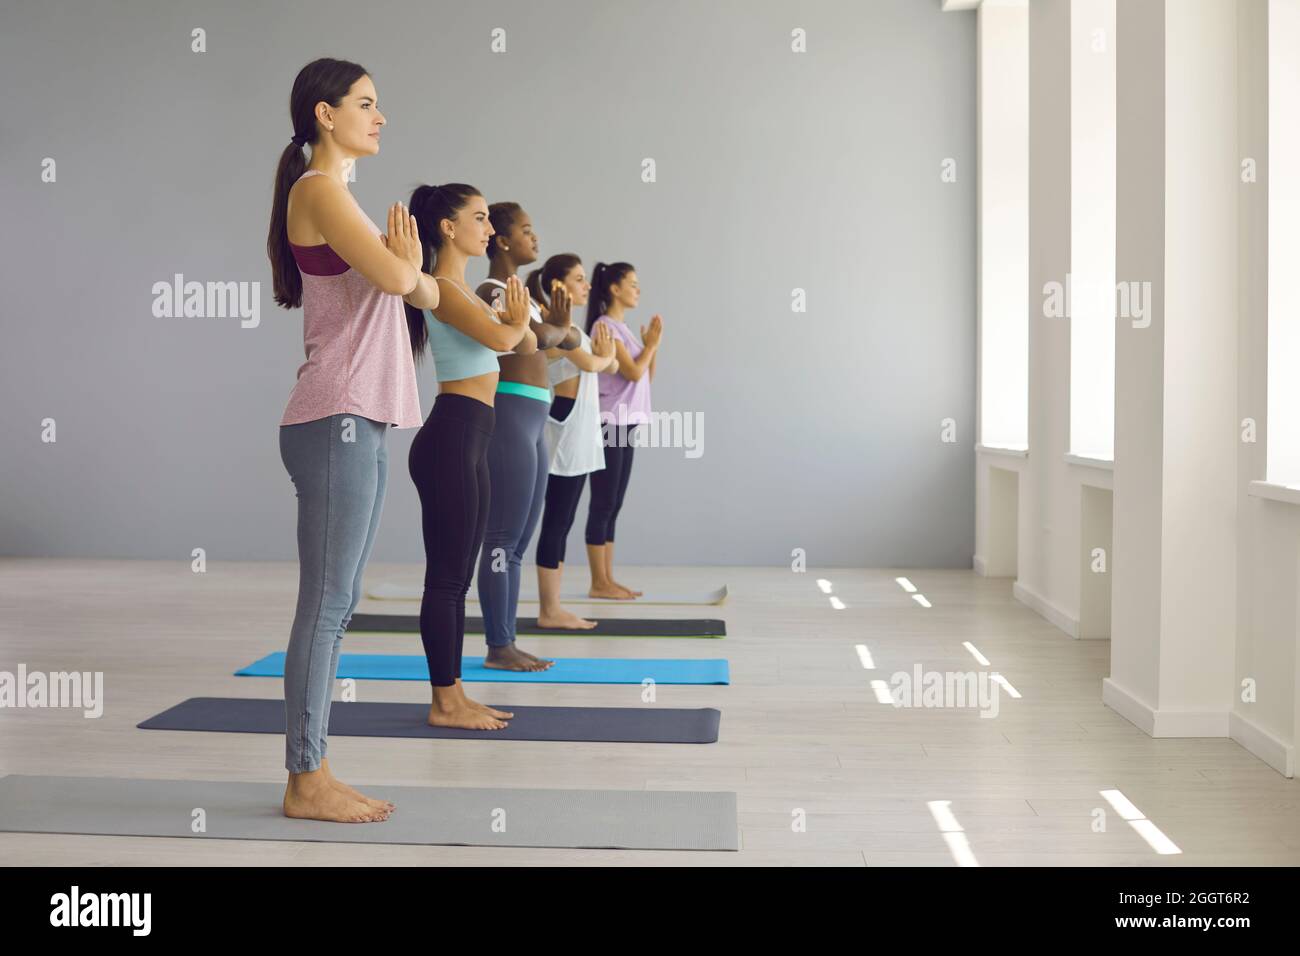 Group of young women standing on mats and doing Namaste during yoga class at gym Stock Photo